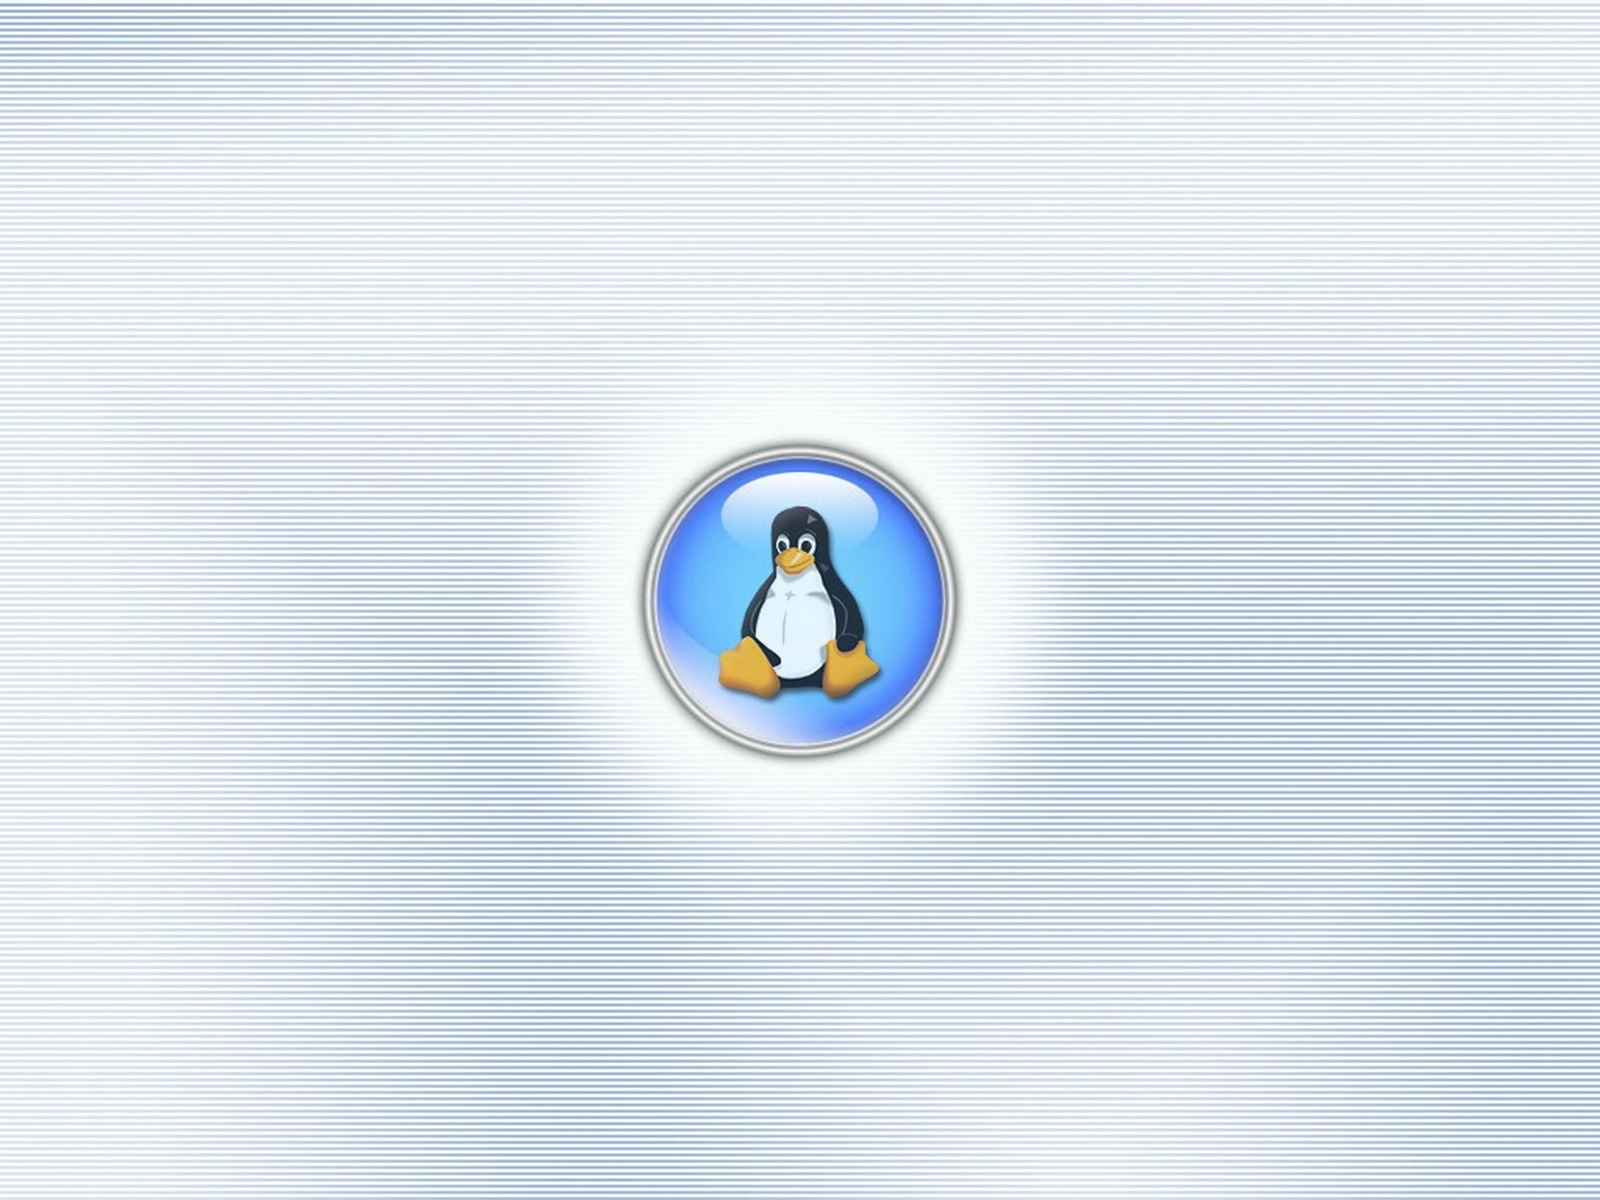 Linux tapety (1) #17 - 1600x1200